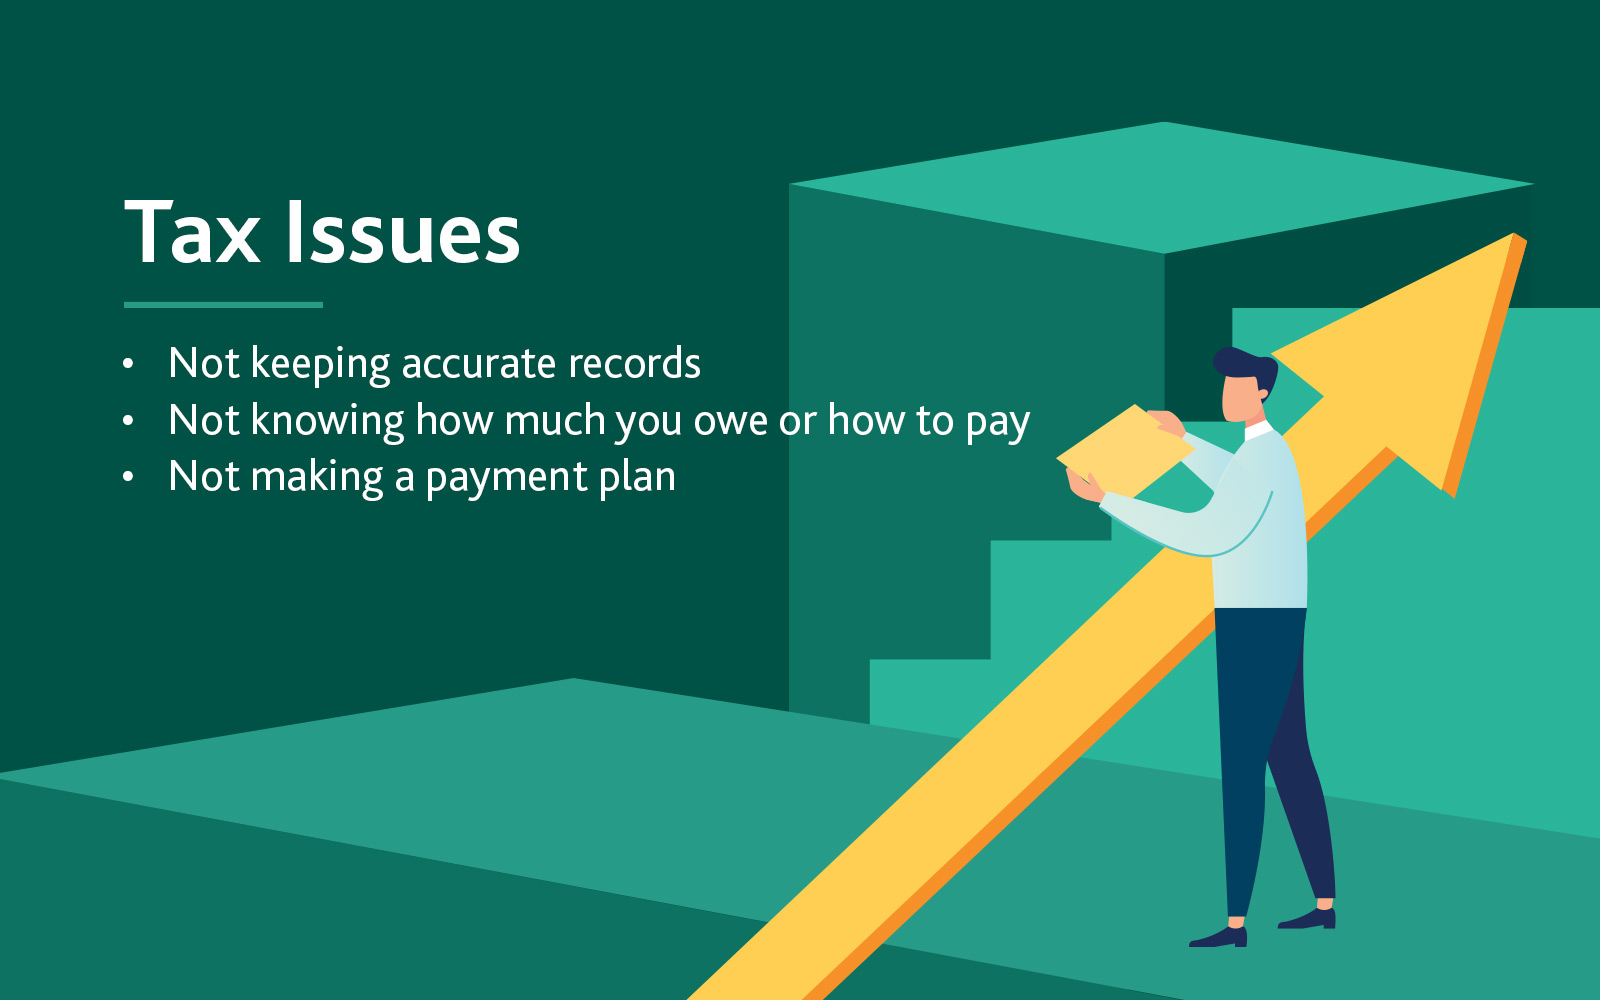 Headline "Tax Issues" with three bullet points underneath that say "not keeping accurate records, not knowing how much you owe or how to pay, and not making a payment plan." Cartoon person in background holding a piece of paper and an arrow pointing up behind them.